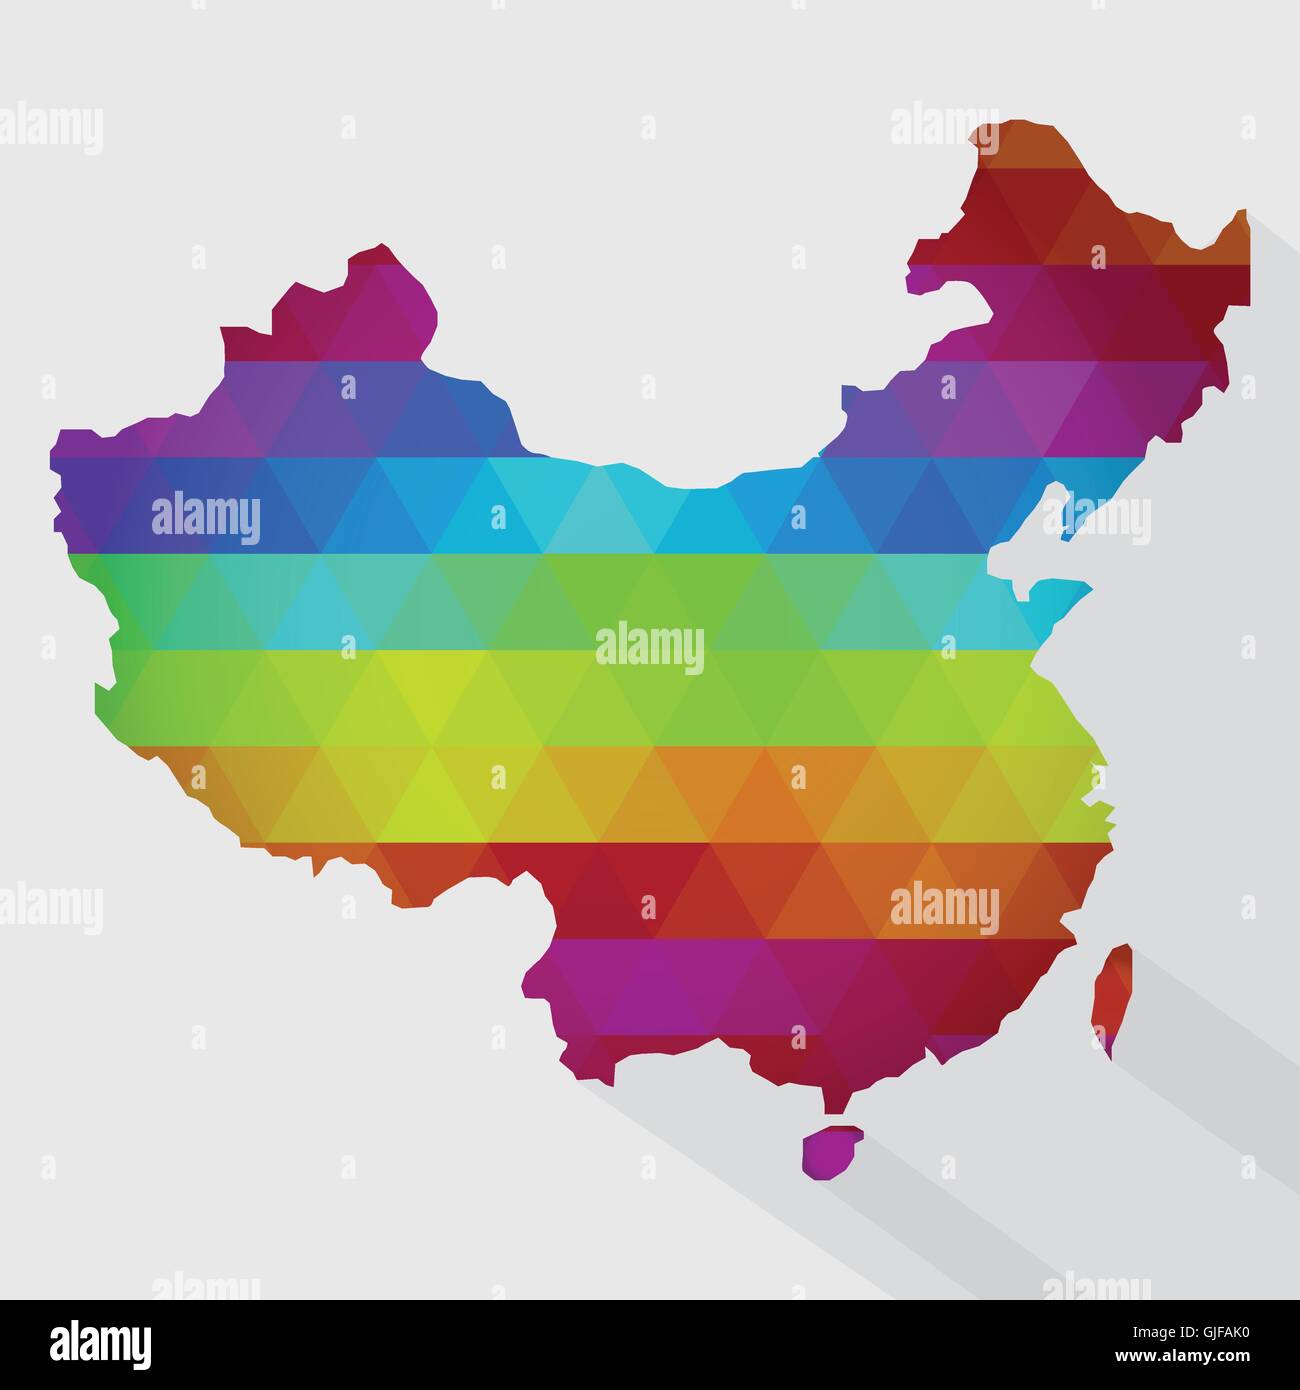 Map of China with colored geometric shapes, triangles, forming the colors of the rainbow. With long shadow. Stock Vector